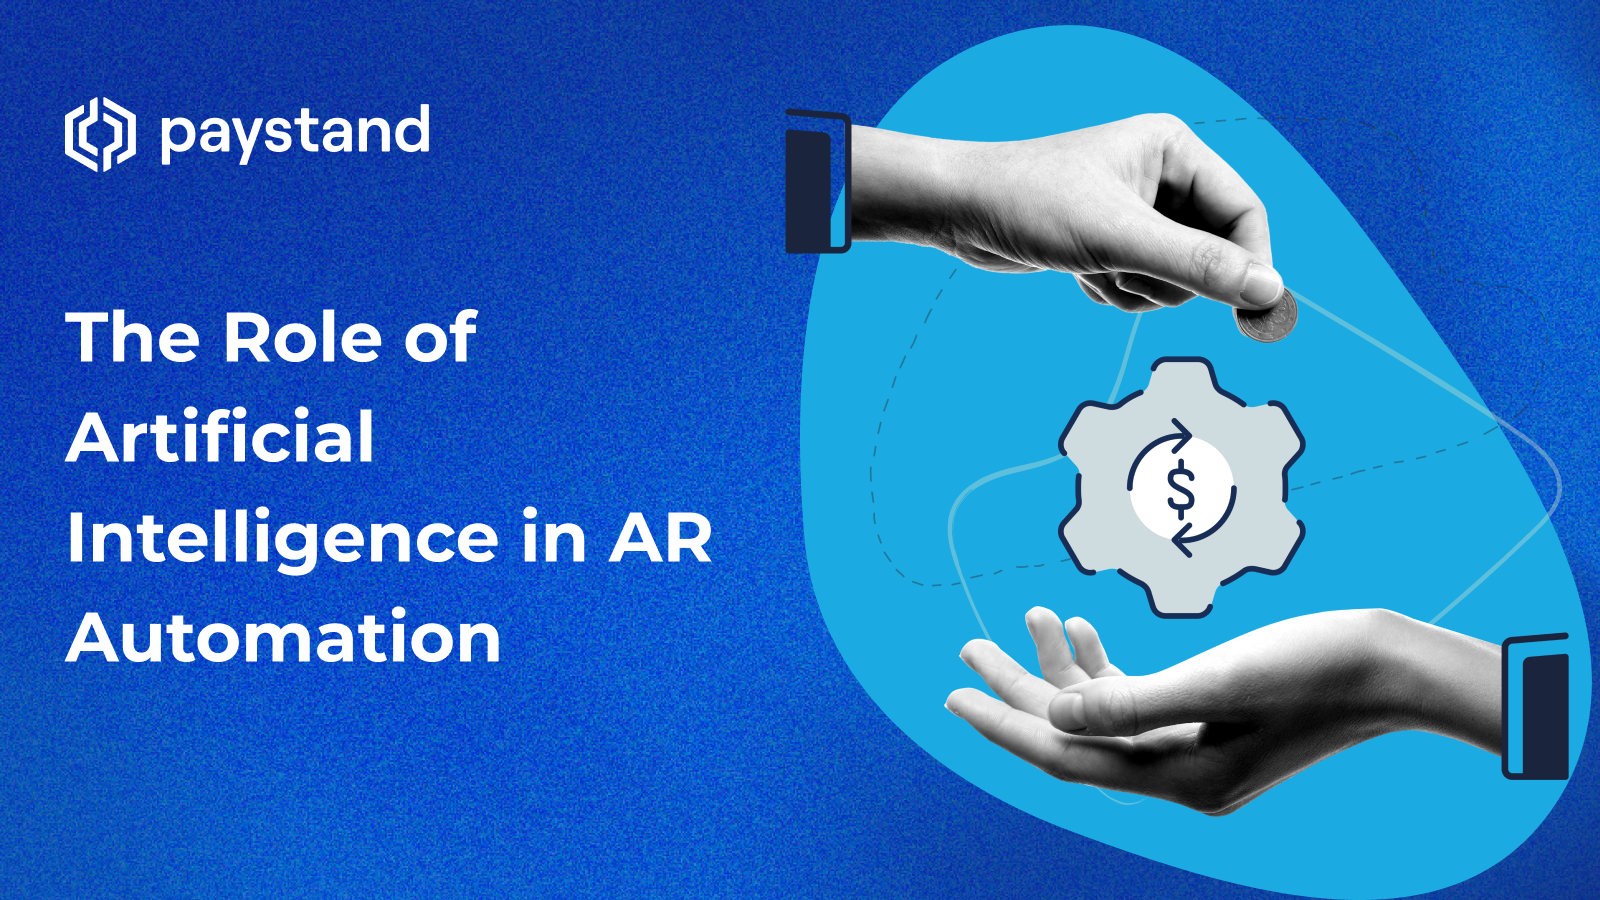 The Role of Artificial Intelligence in AR Automation